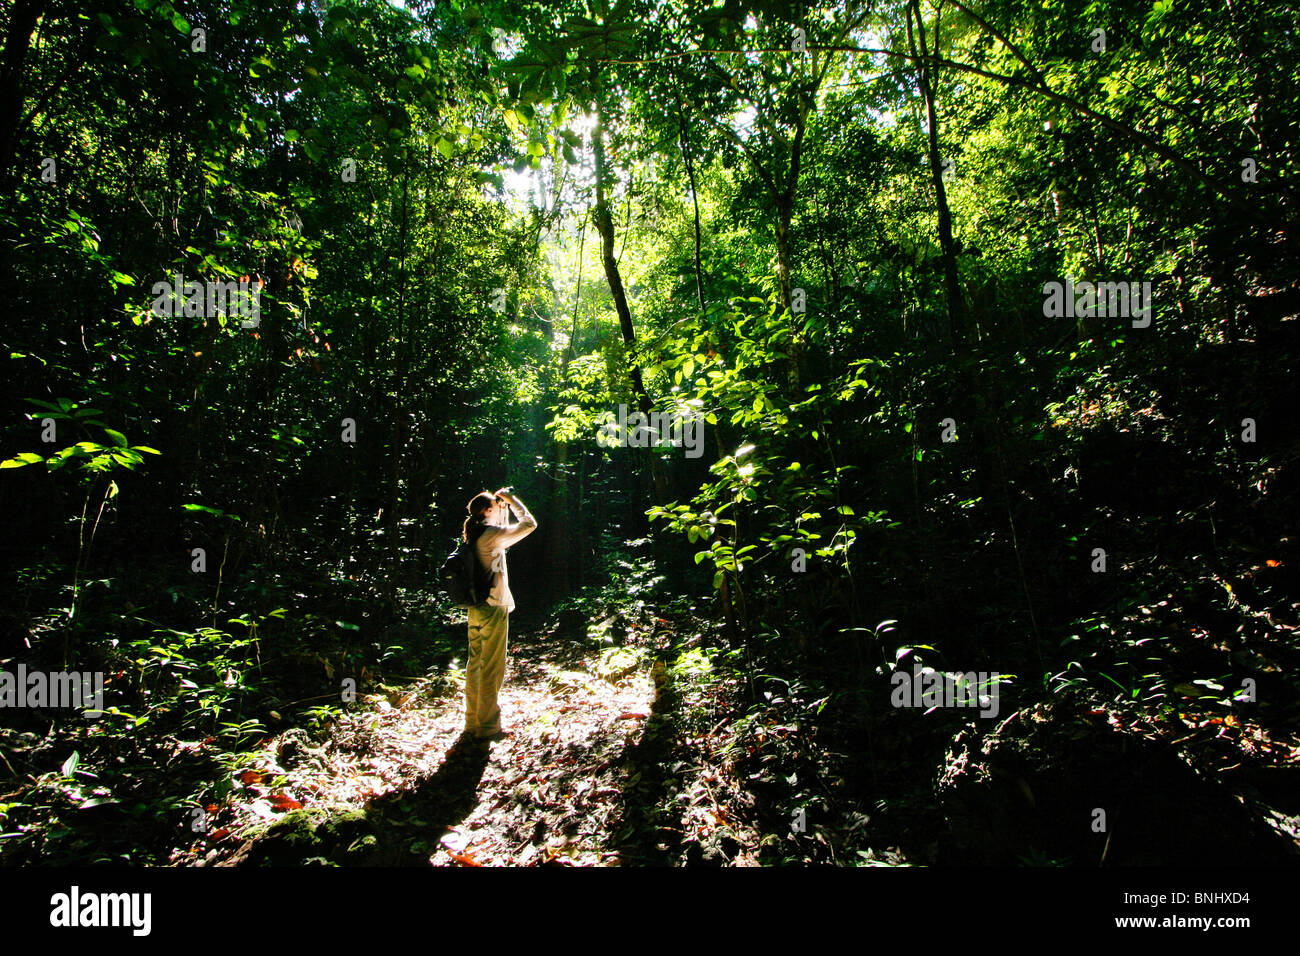 Woman standing in a rainforest and looking through binoculars, Rajah Sikatuna National Park, Bohol, Philippines Stock Photo